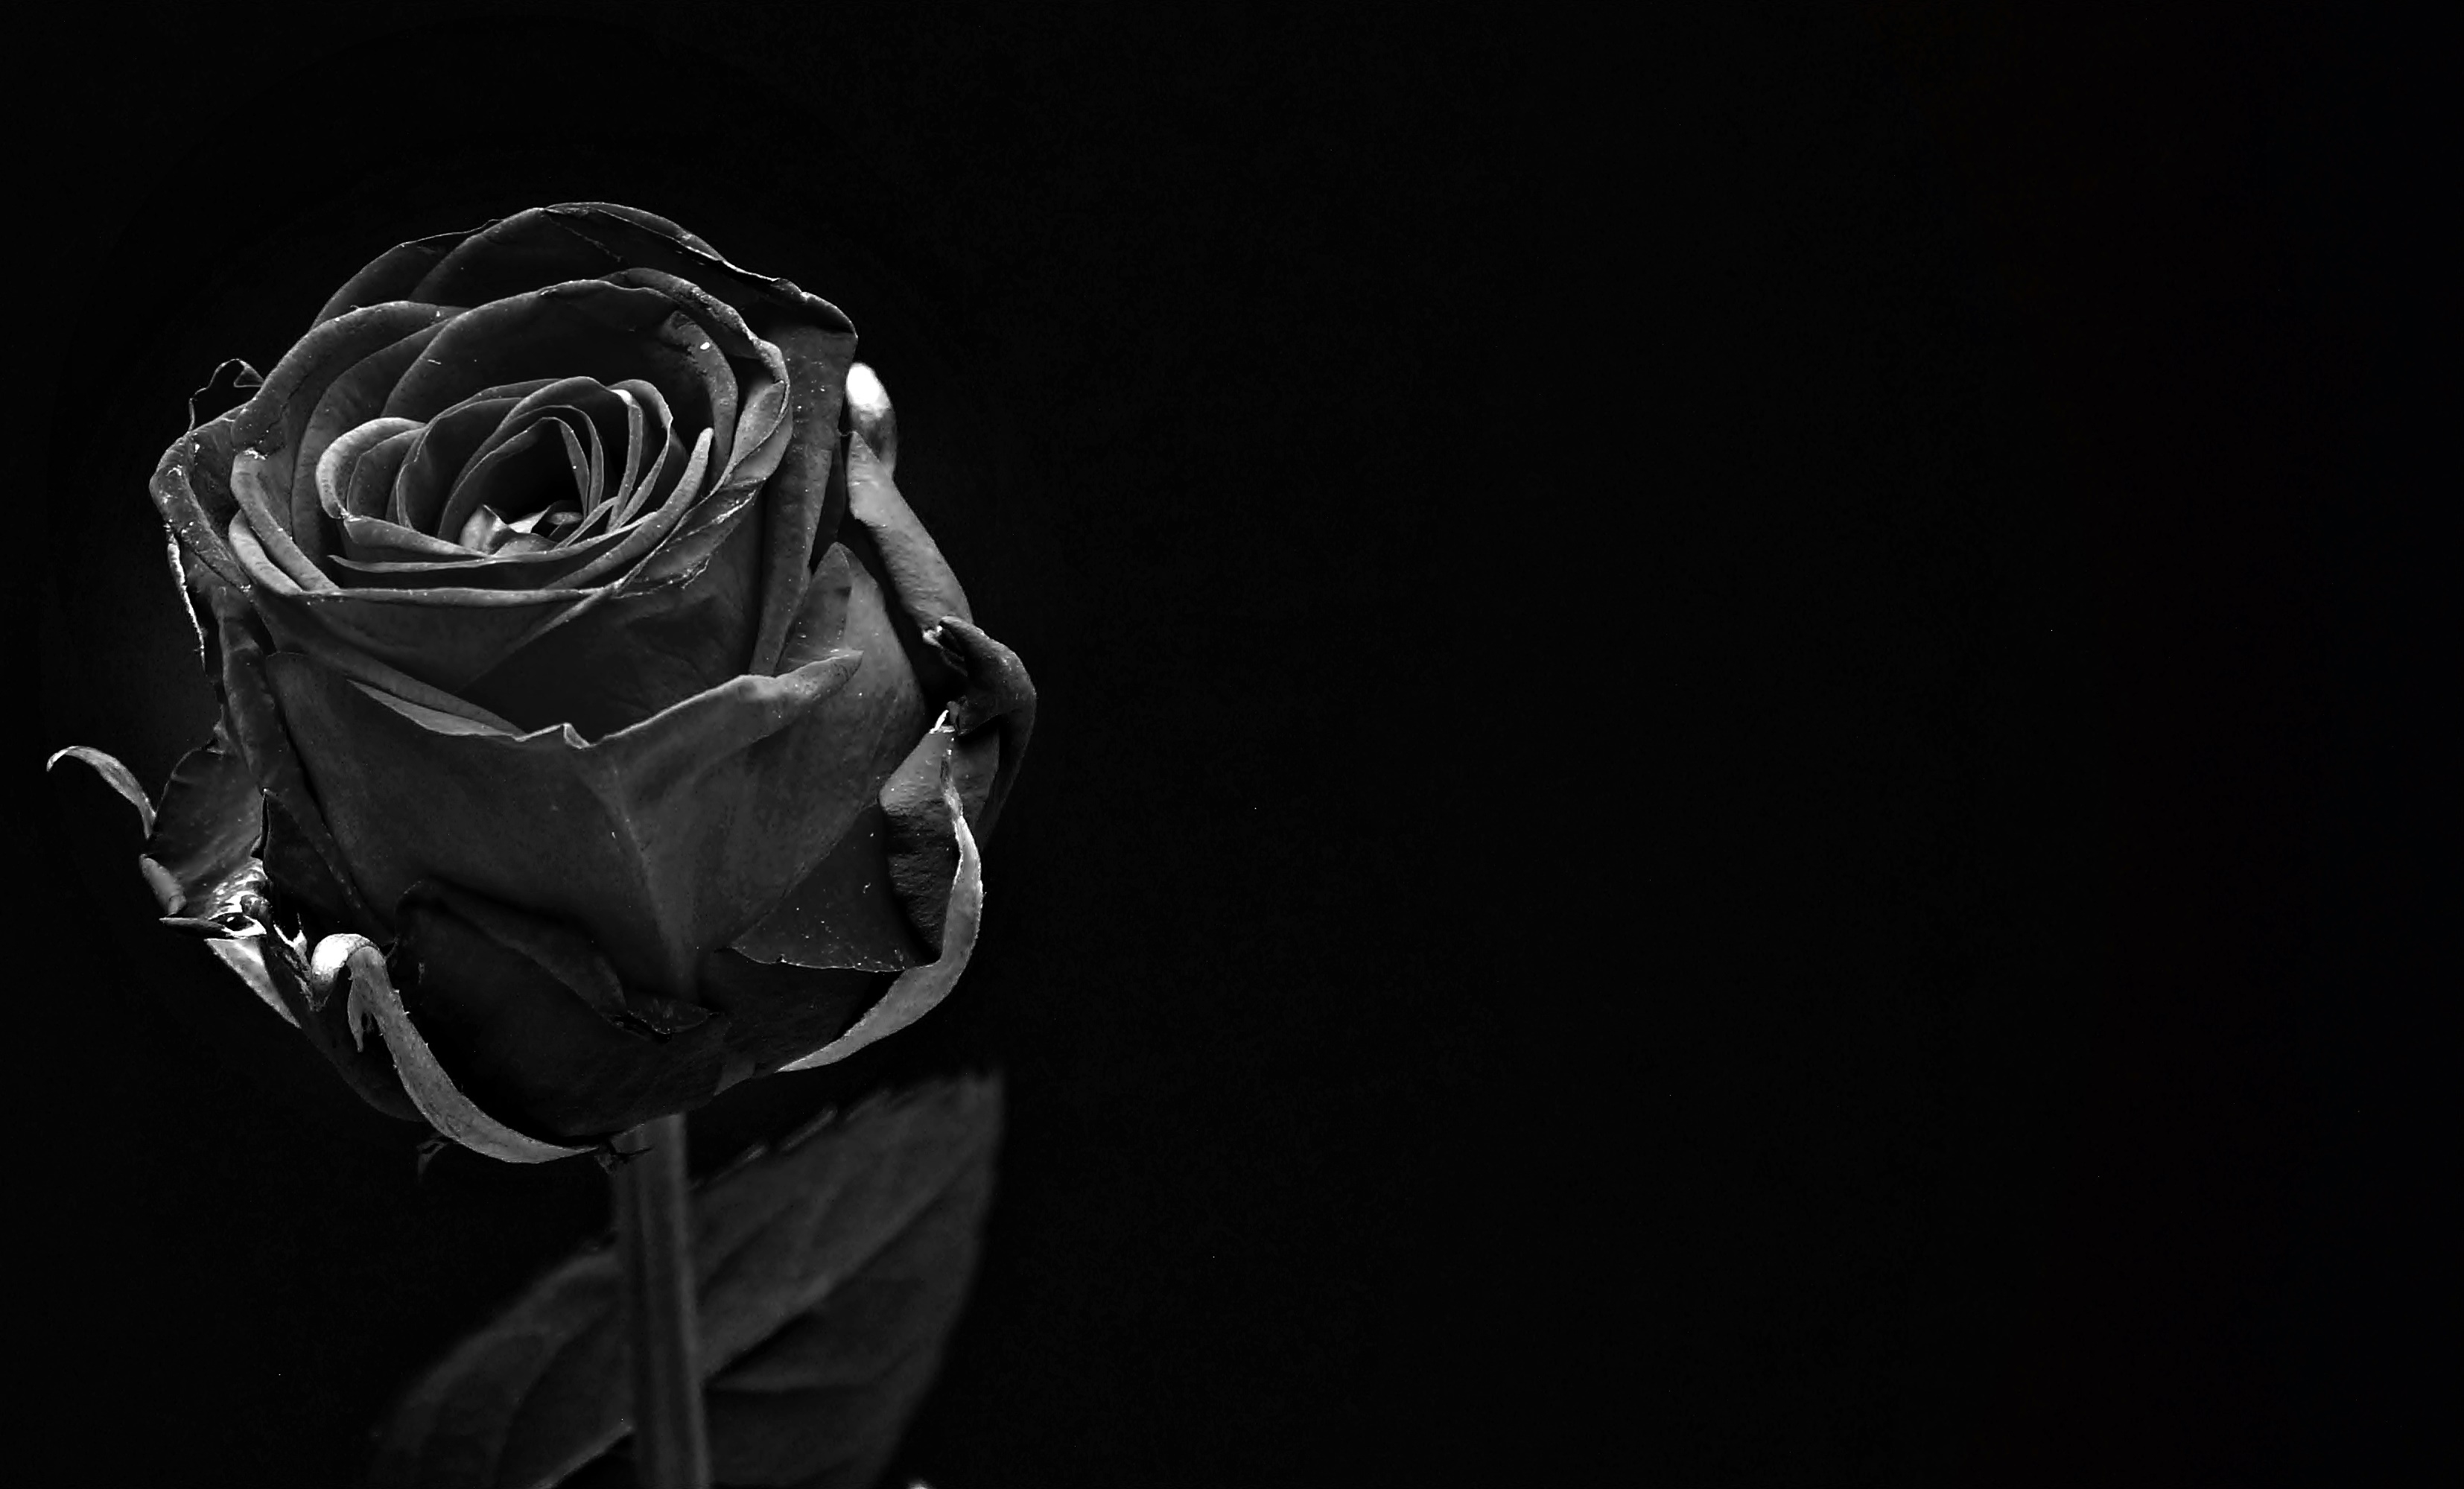 Download 2560x1440 Black Rose, Close Up Wallpaper For IMac 27 Inch